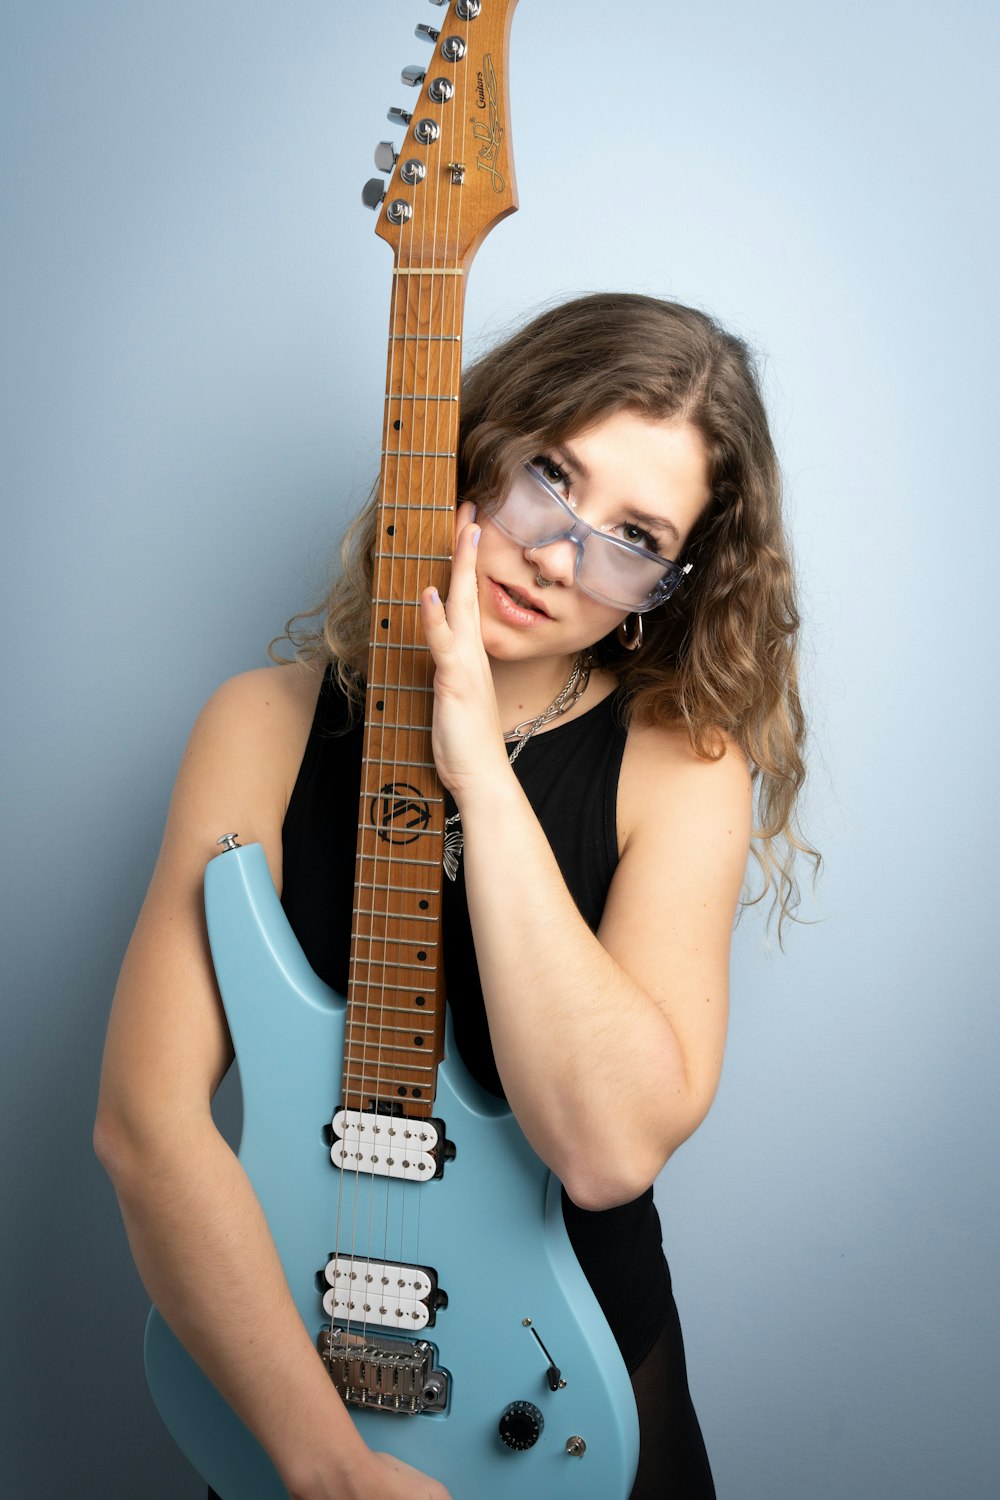 a woman with glasses holding a blue guitar